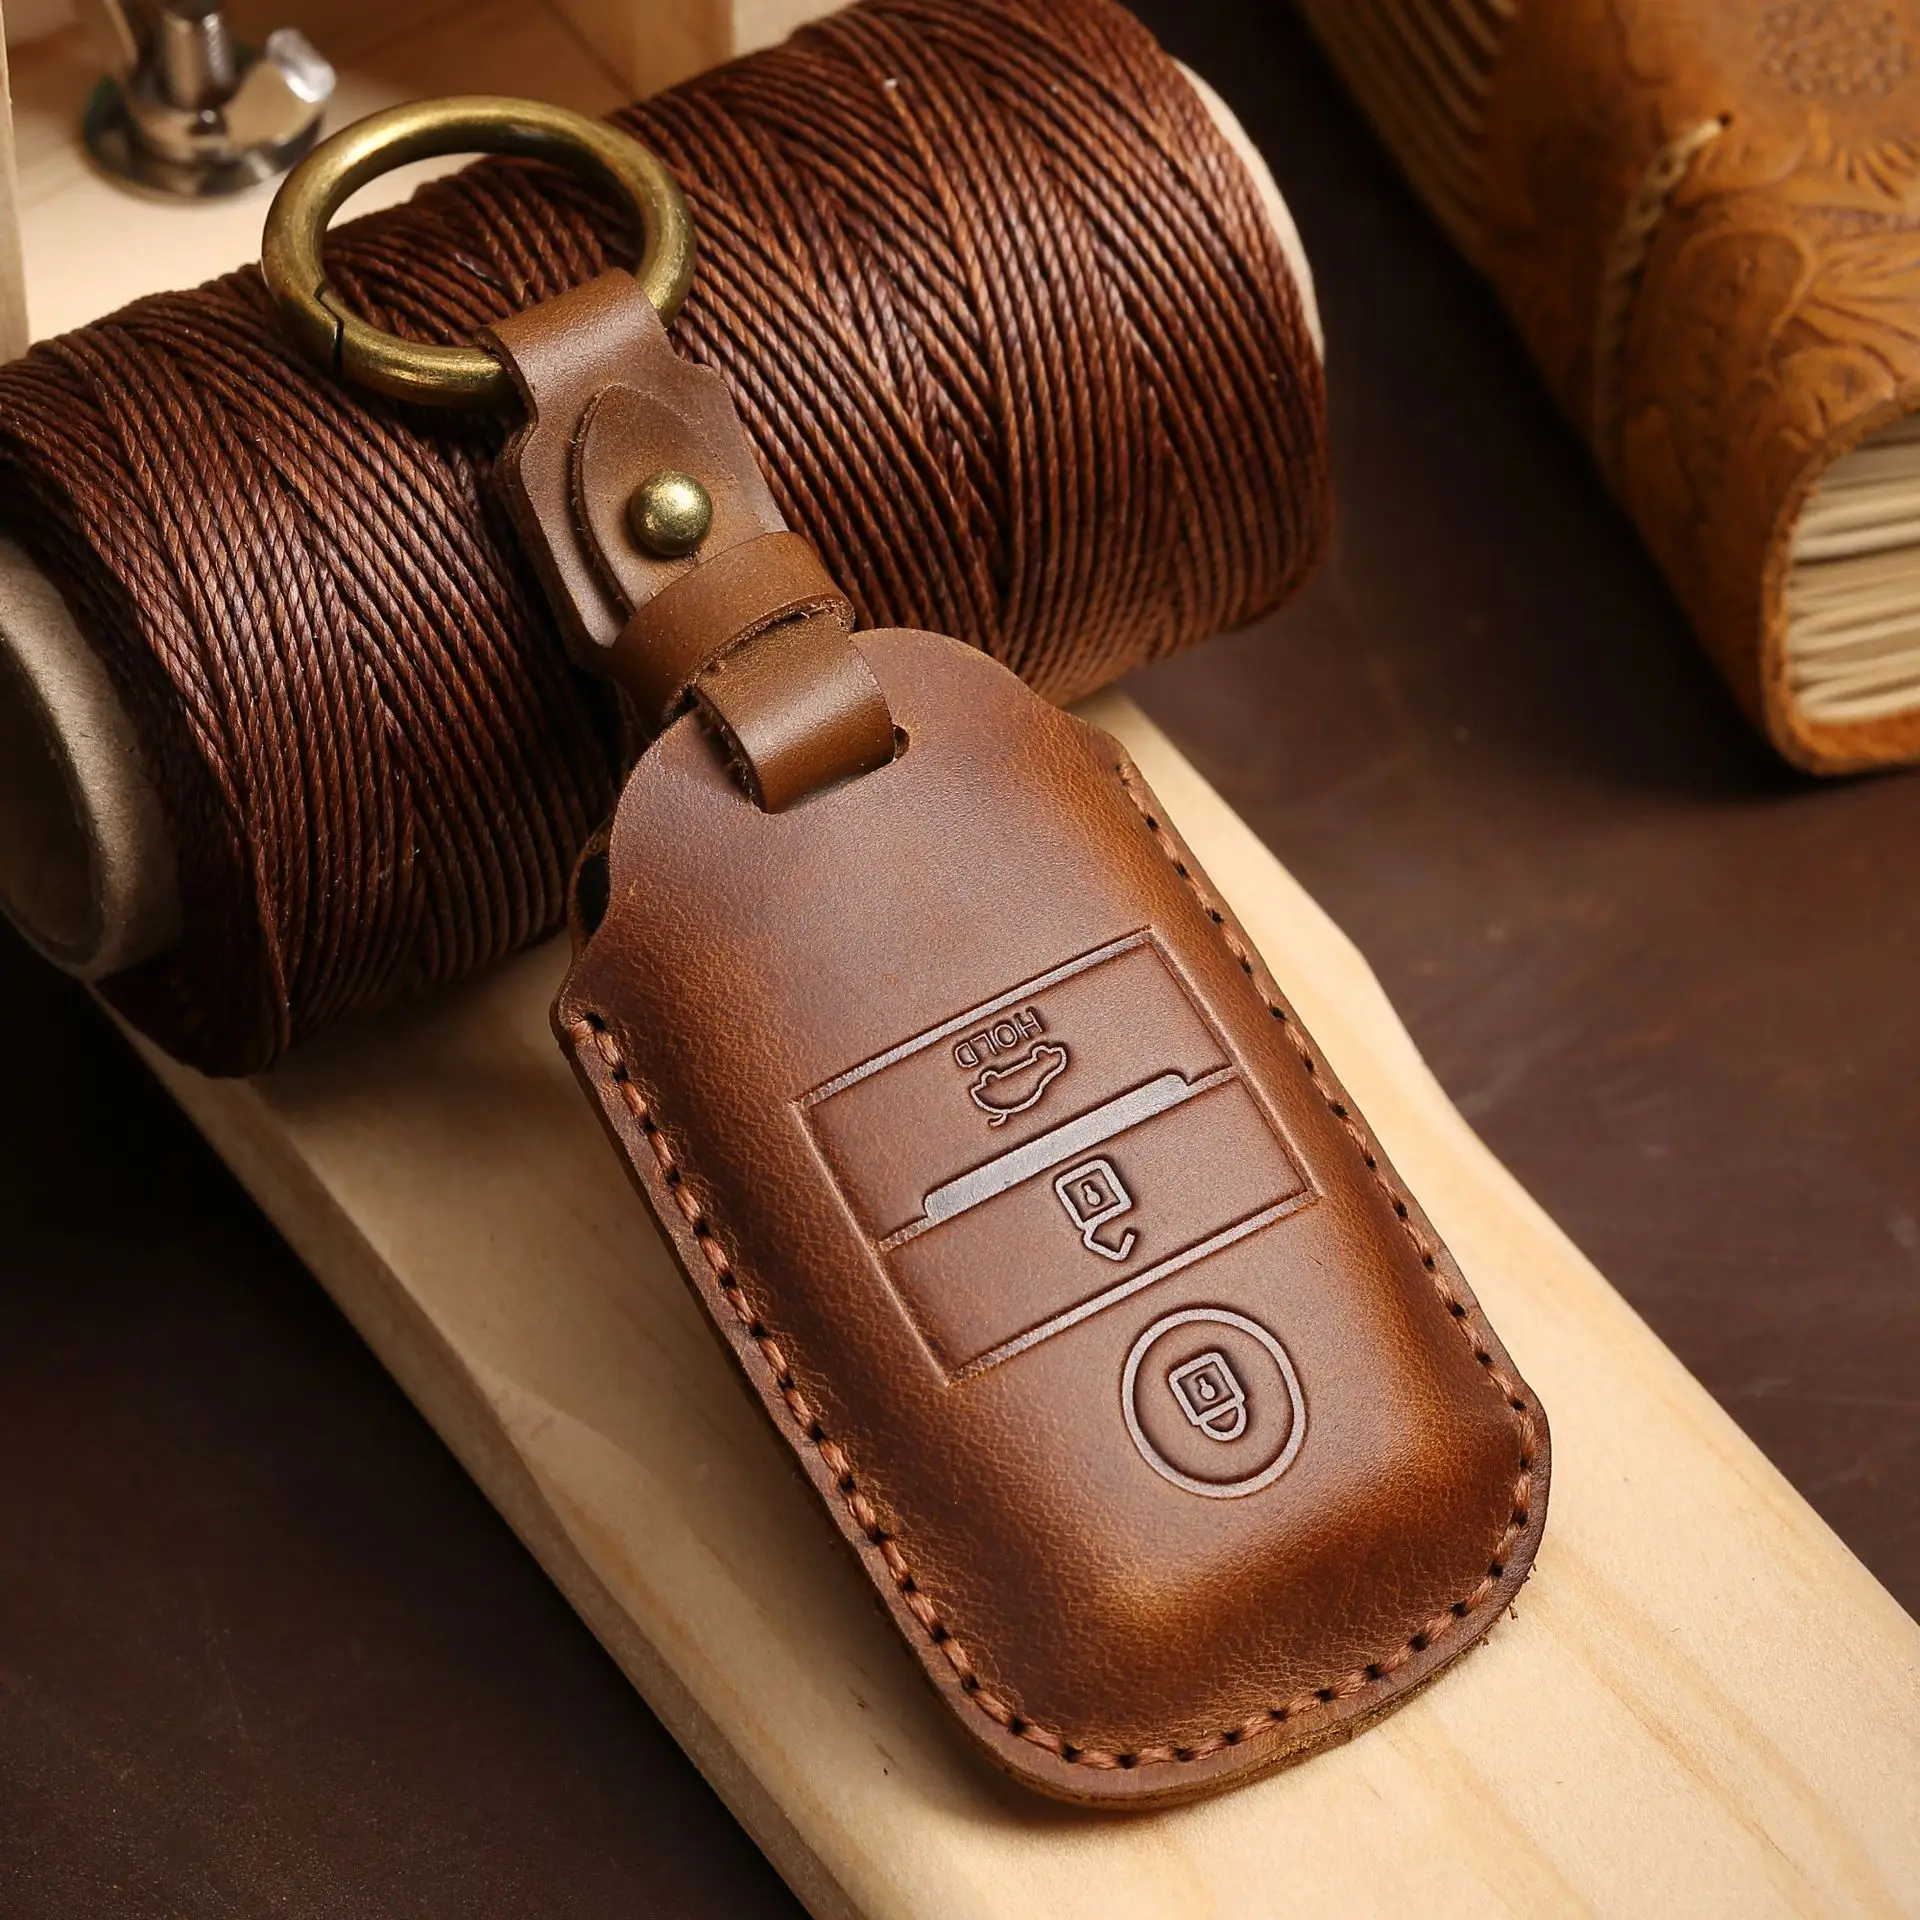 

Luxury Car Key Case Cover Leather Pouch Fob Holder Keychain Accessories for KIa Sportage R Carnival Fcrte K5 KX5 KX3 Keyring Bag